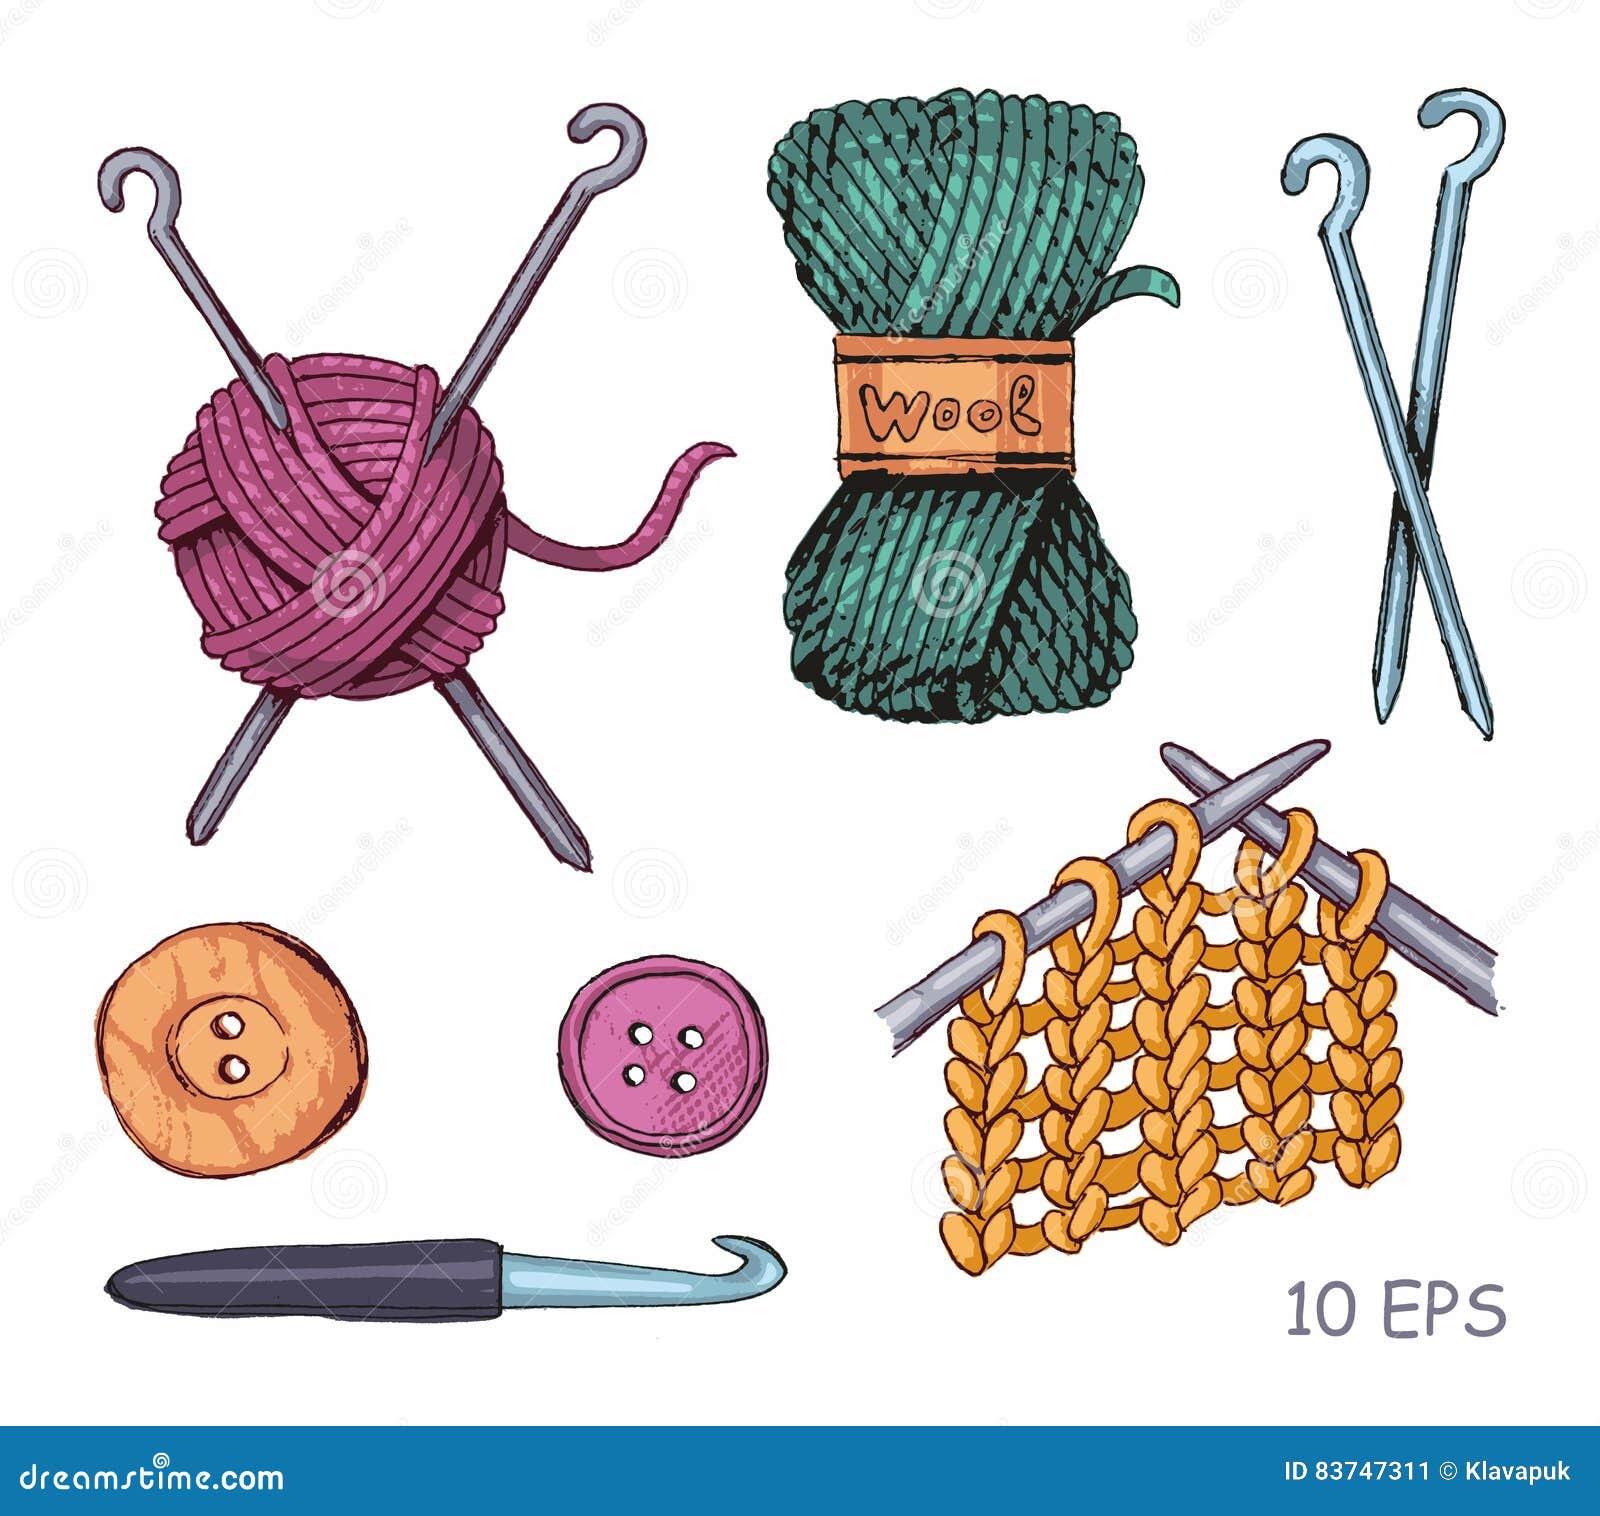 Tools and Materials for Knitting. Vector Sketch Stock Vector ...